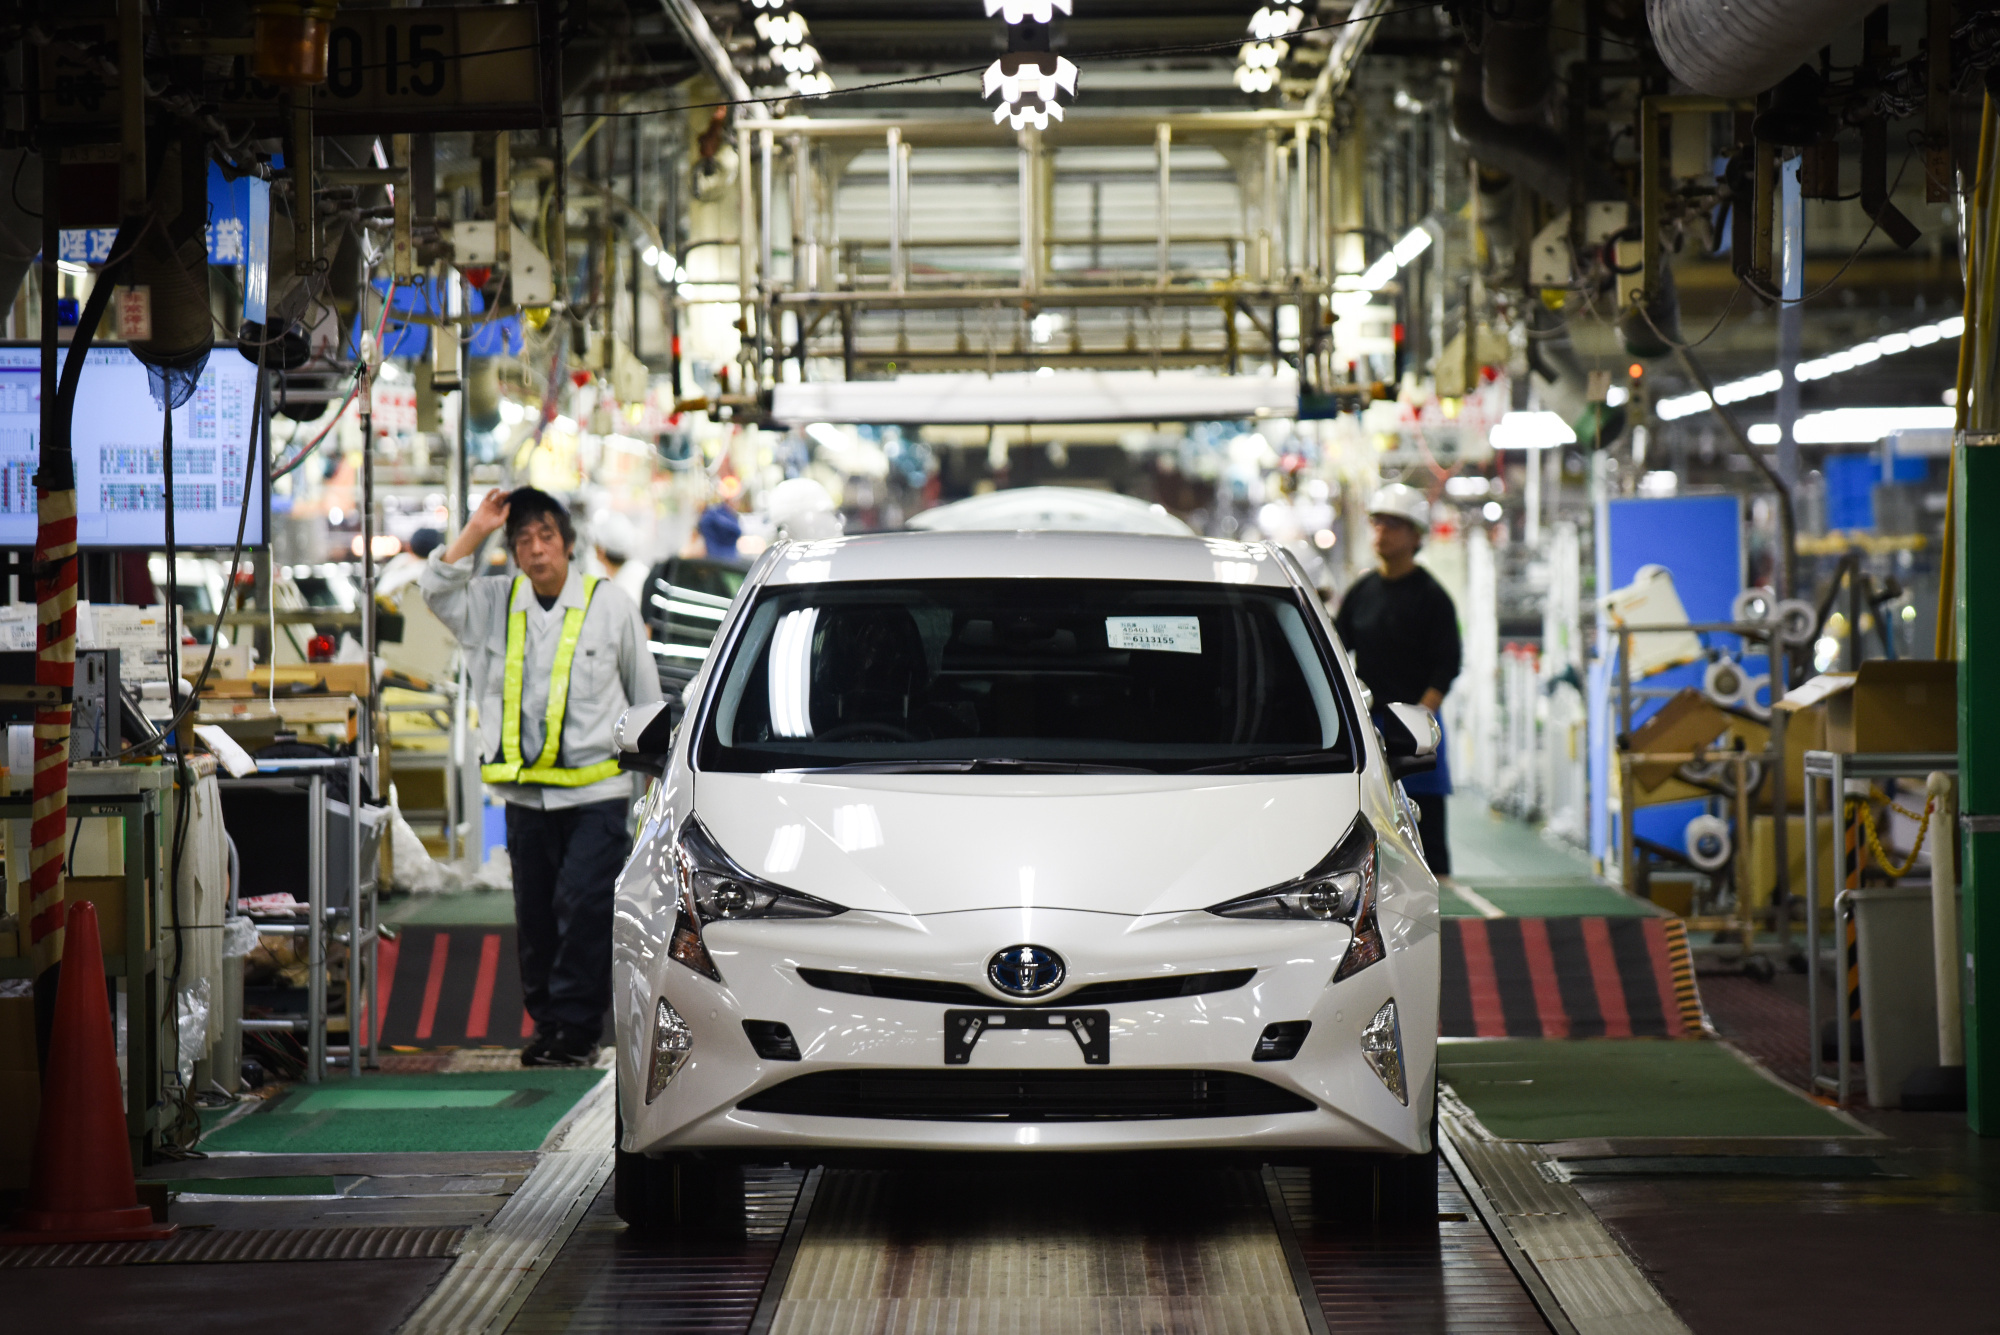 A Toyota Prius automobile stands on the production line at the Toyota Motor Corp. Tsutsumi plant in Toyota City, Aichi, Japan, in&nbsp;2017.&nbsp;